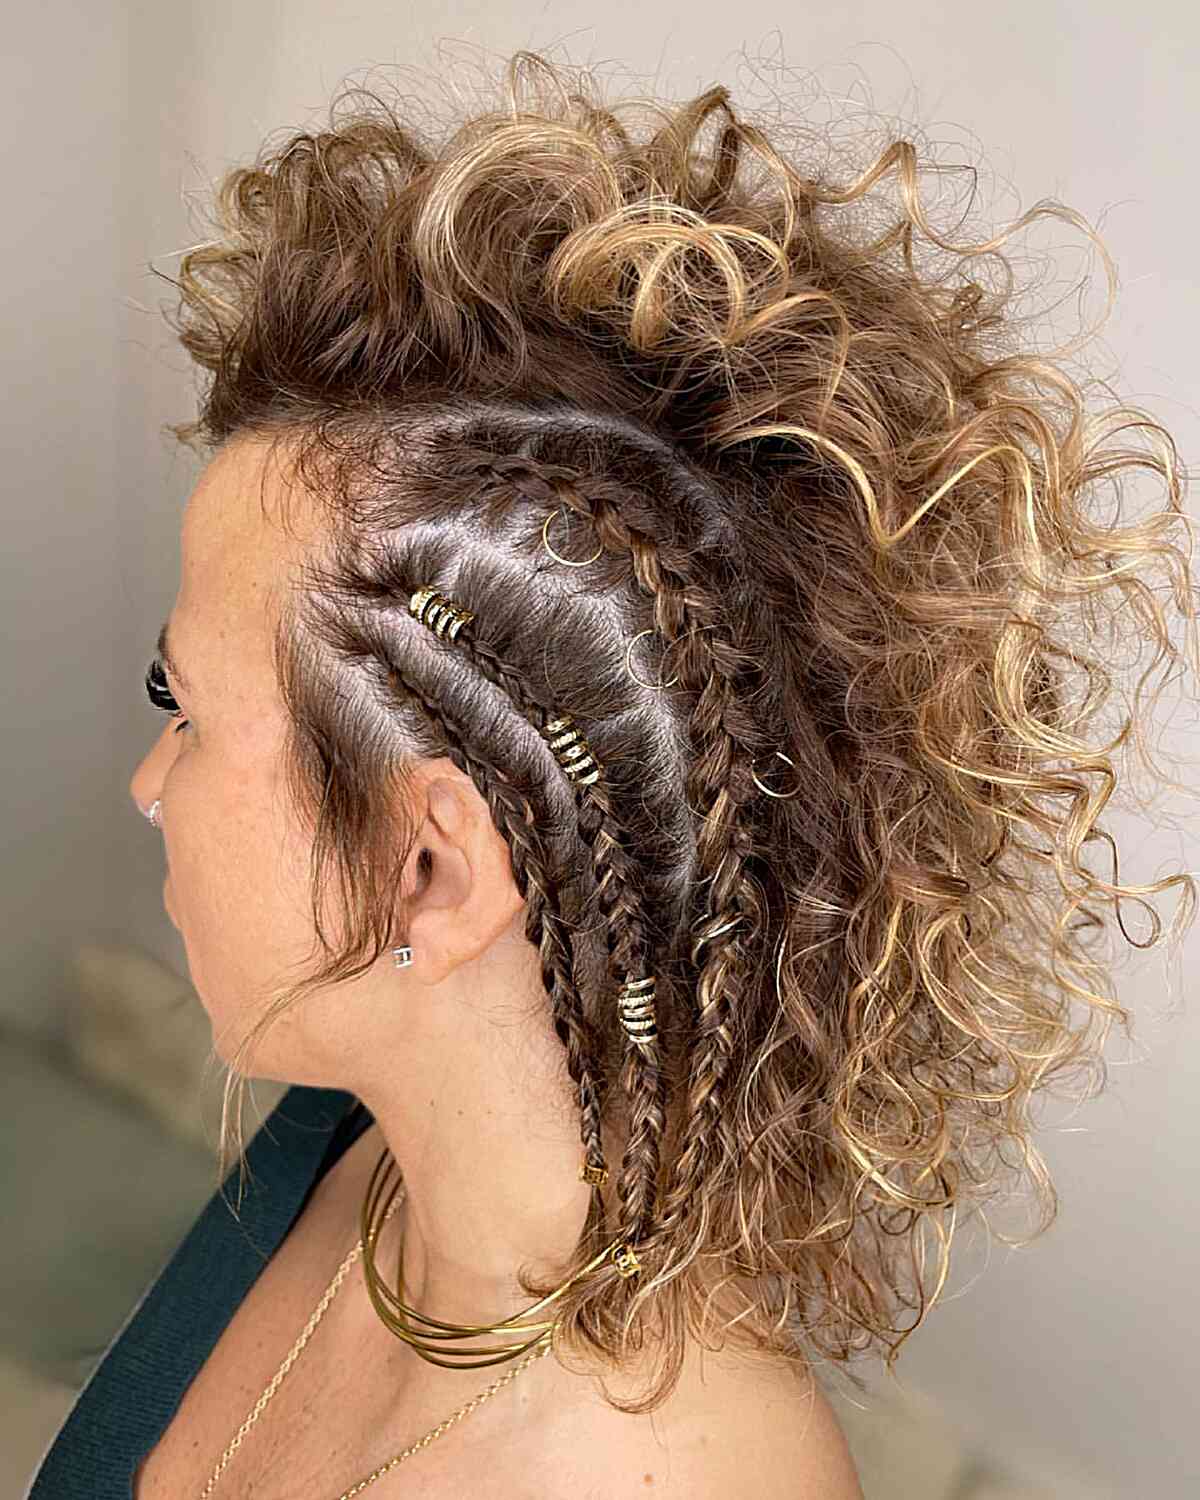 Viking-Inspired Curly Short Hair with Braided Side and Ring Accessories